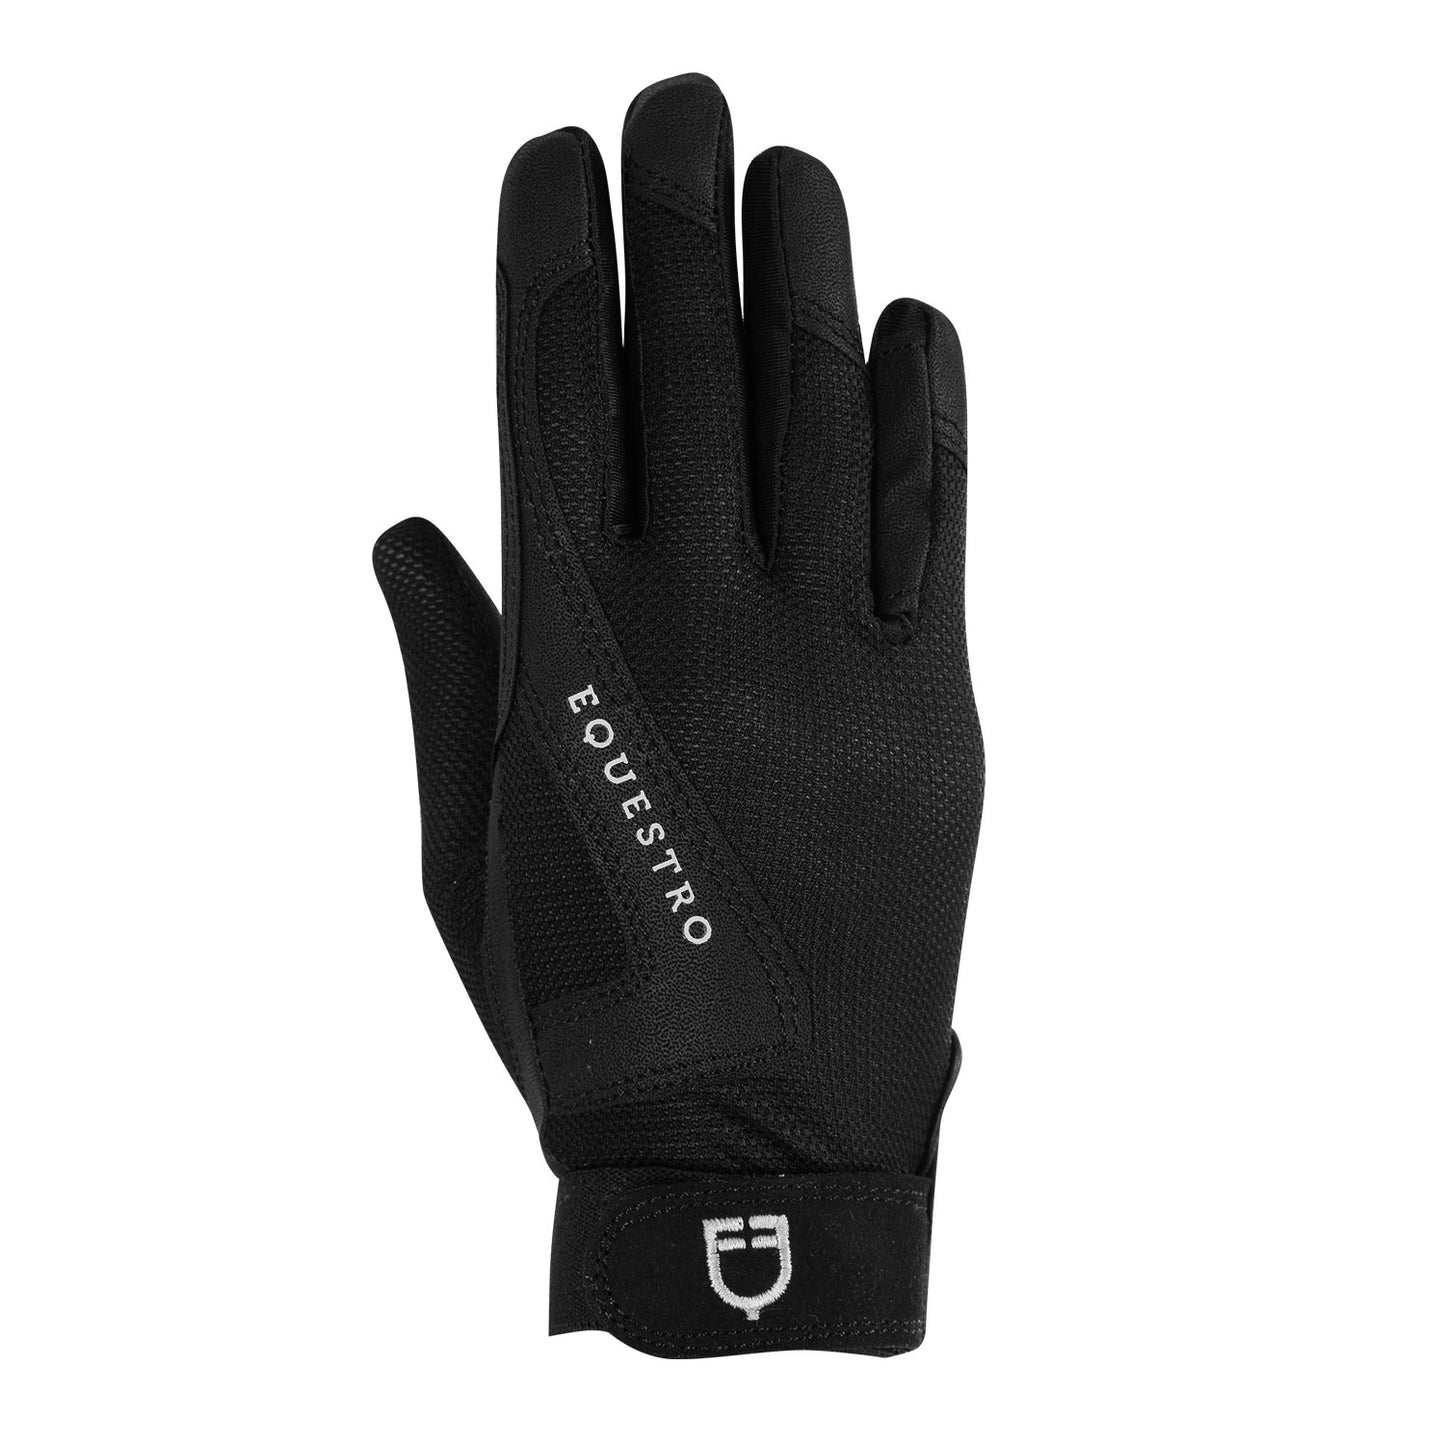 EQUESTRO - Kids' Gloves in Technical Fabric